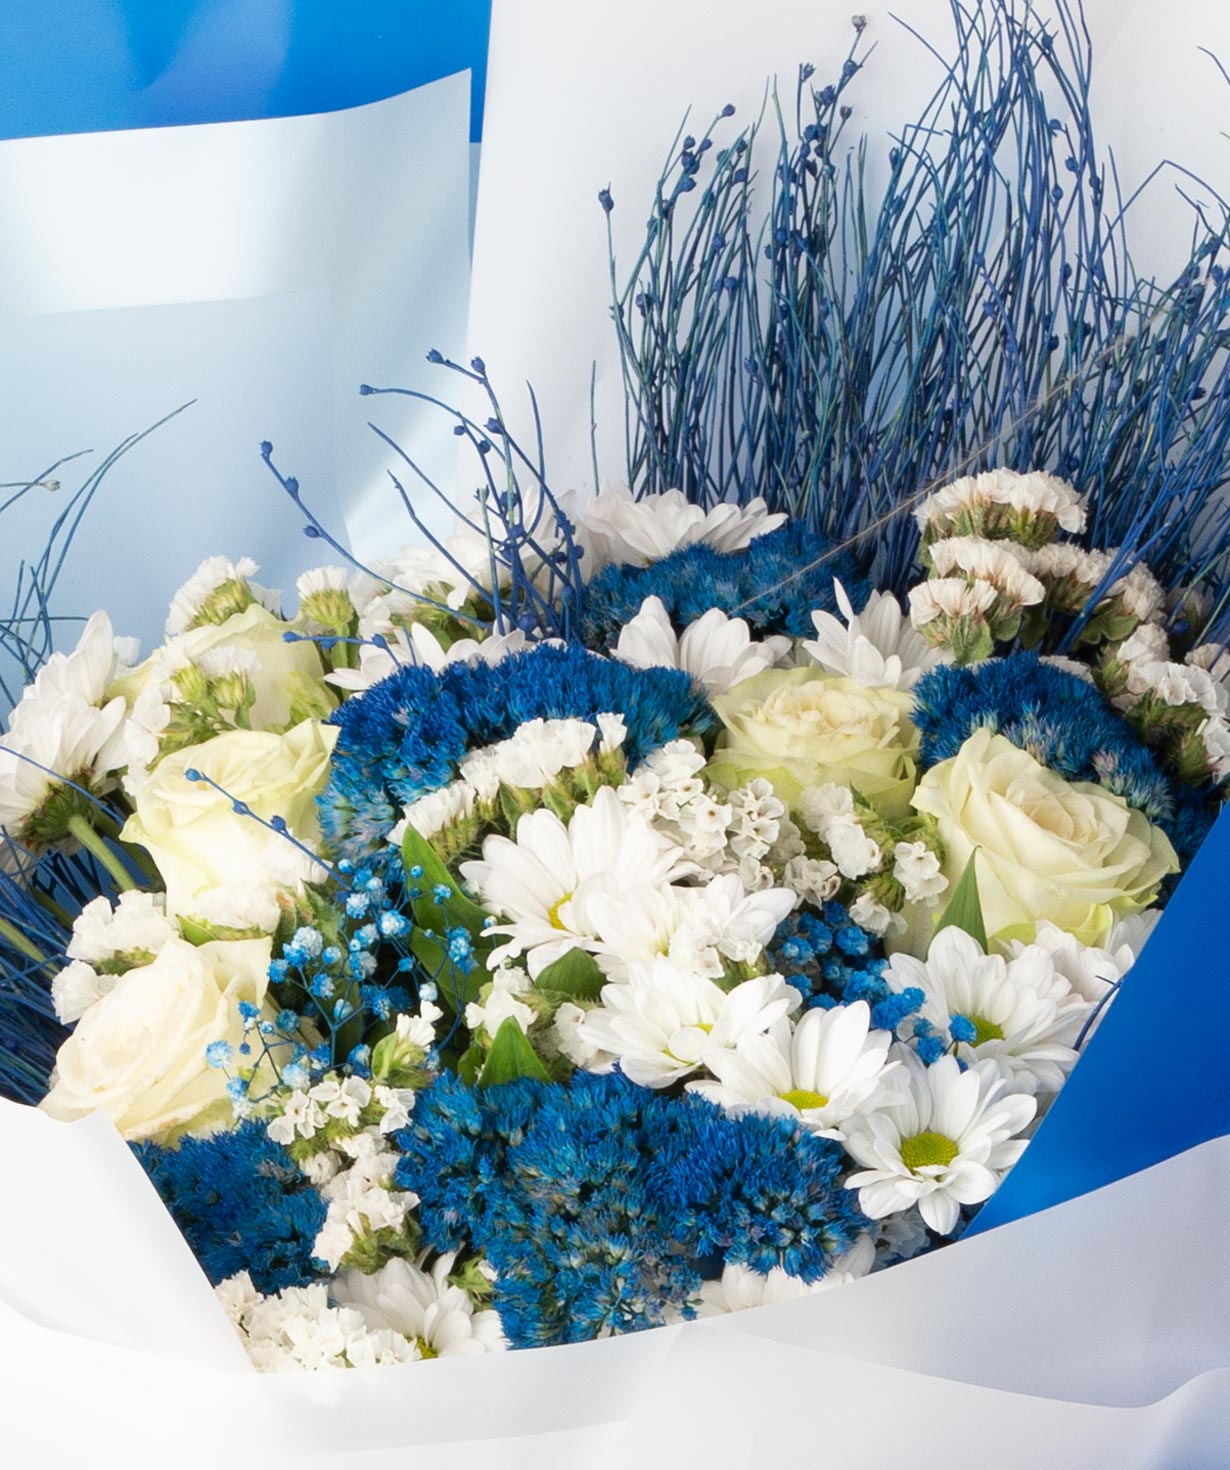 Bouquet ''Lunano'' with roses and chrysanthemums